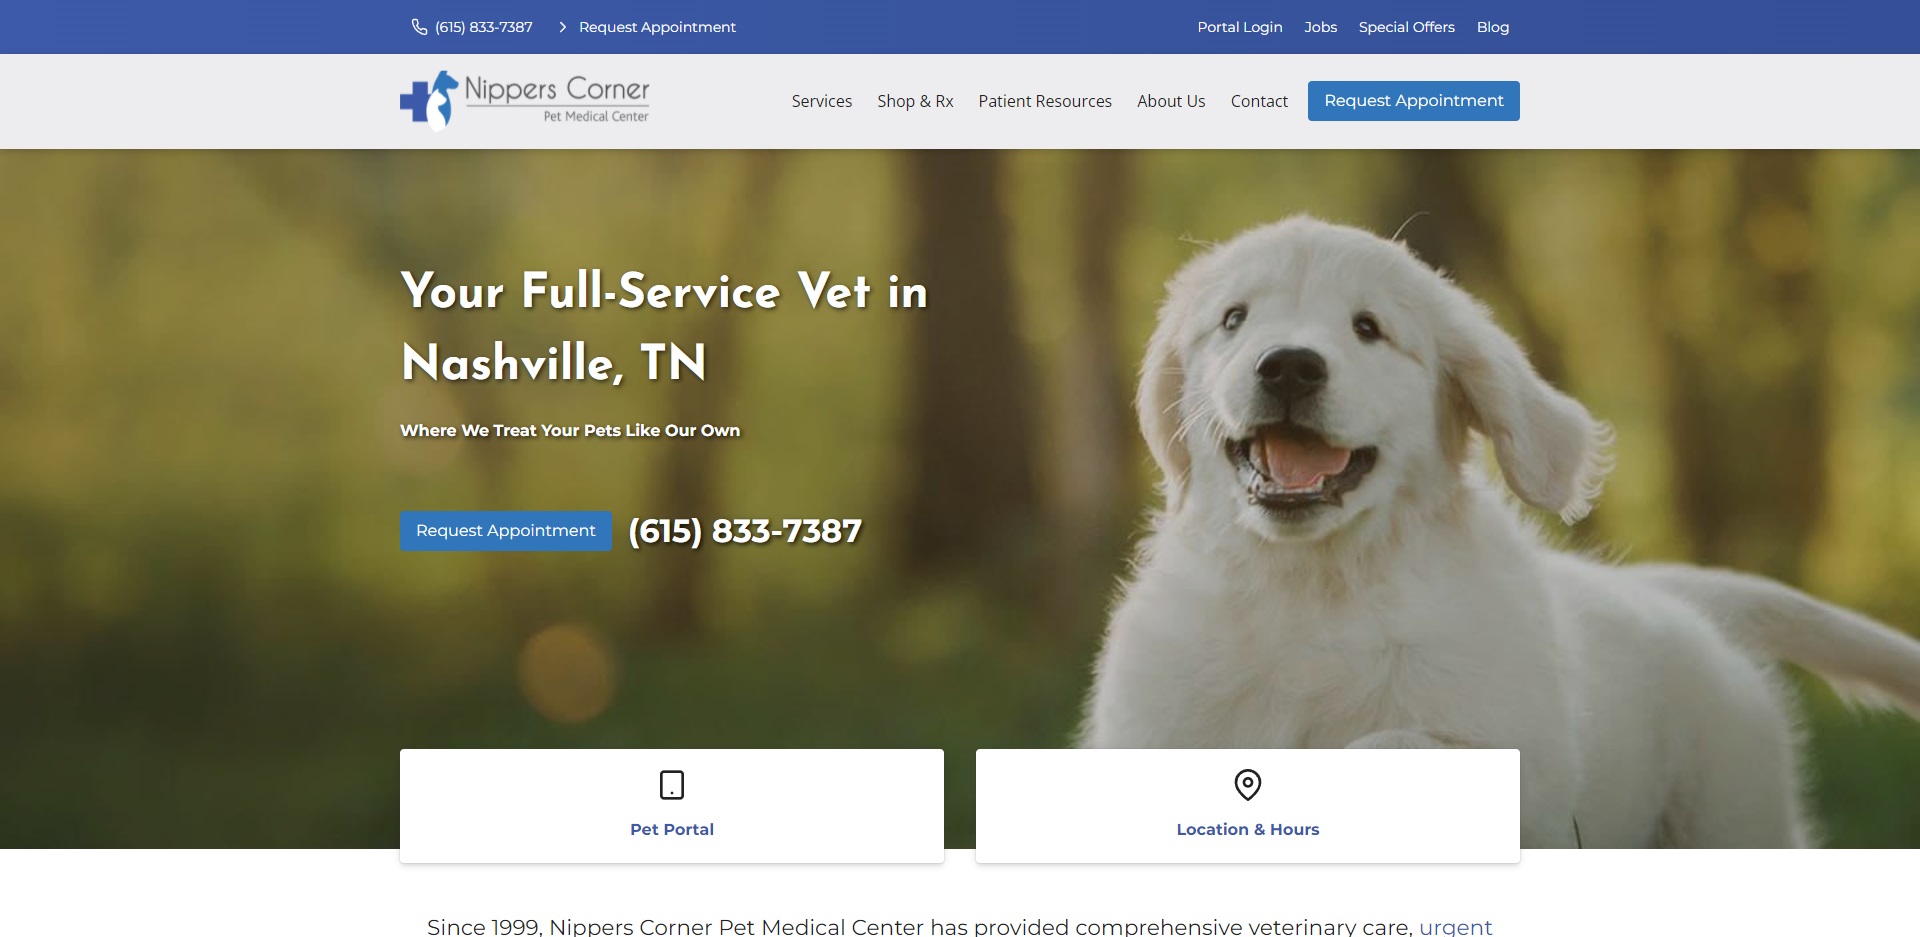 The Best Pet Care Centres in Nashville, TN